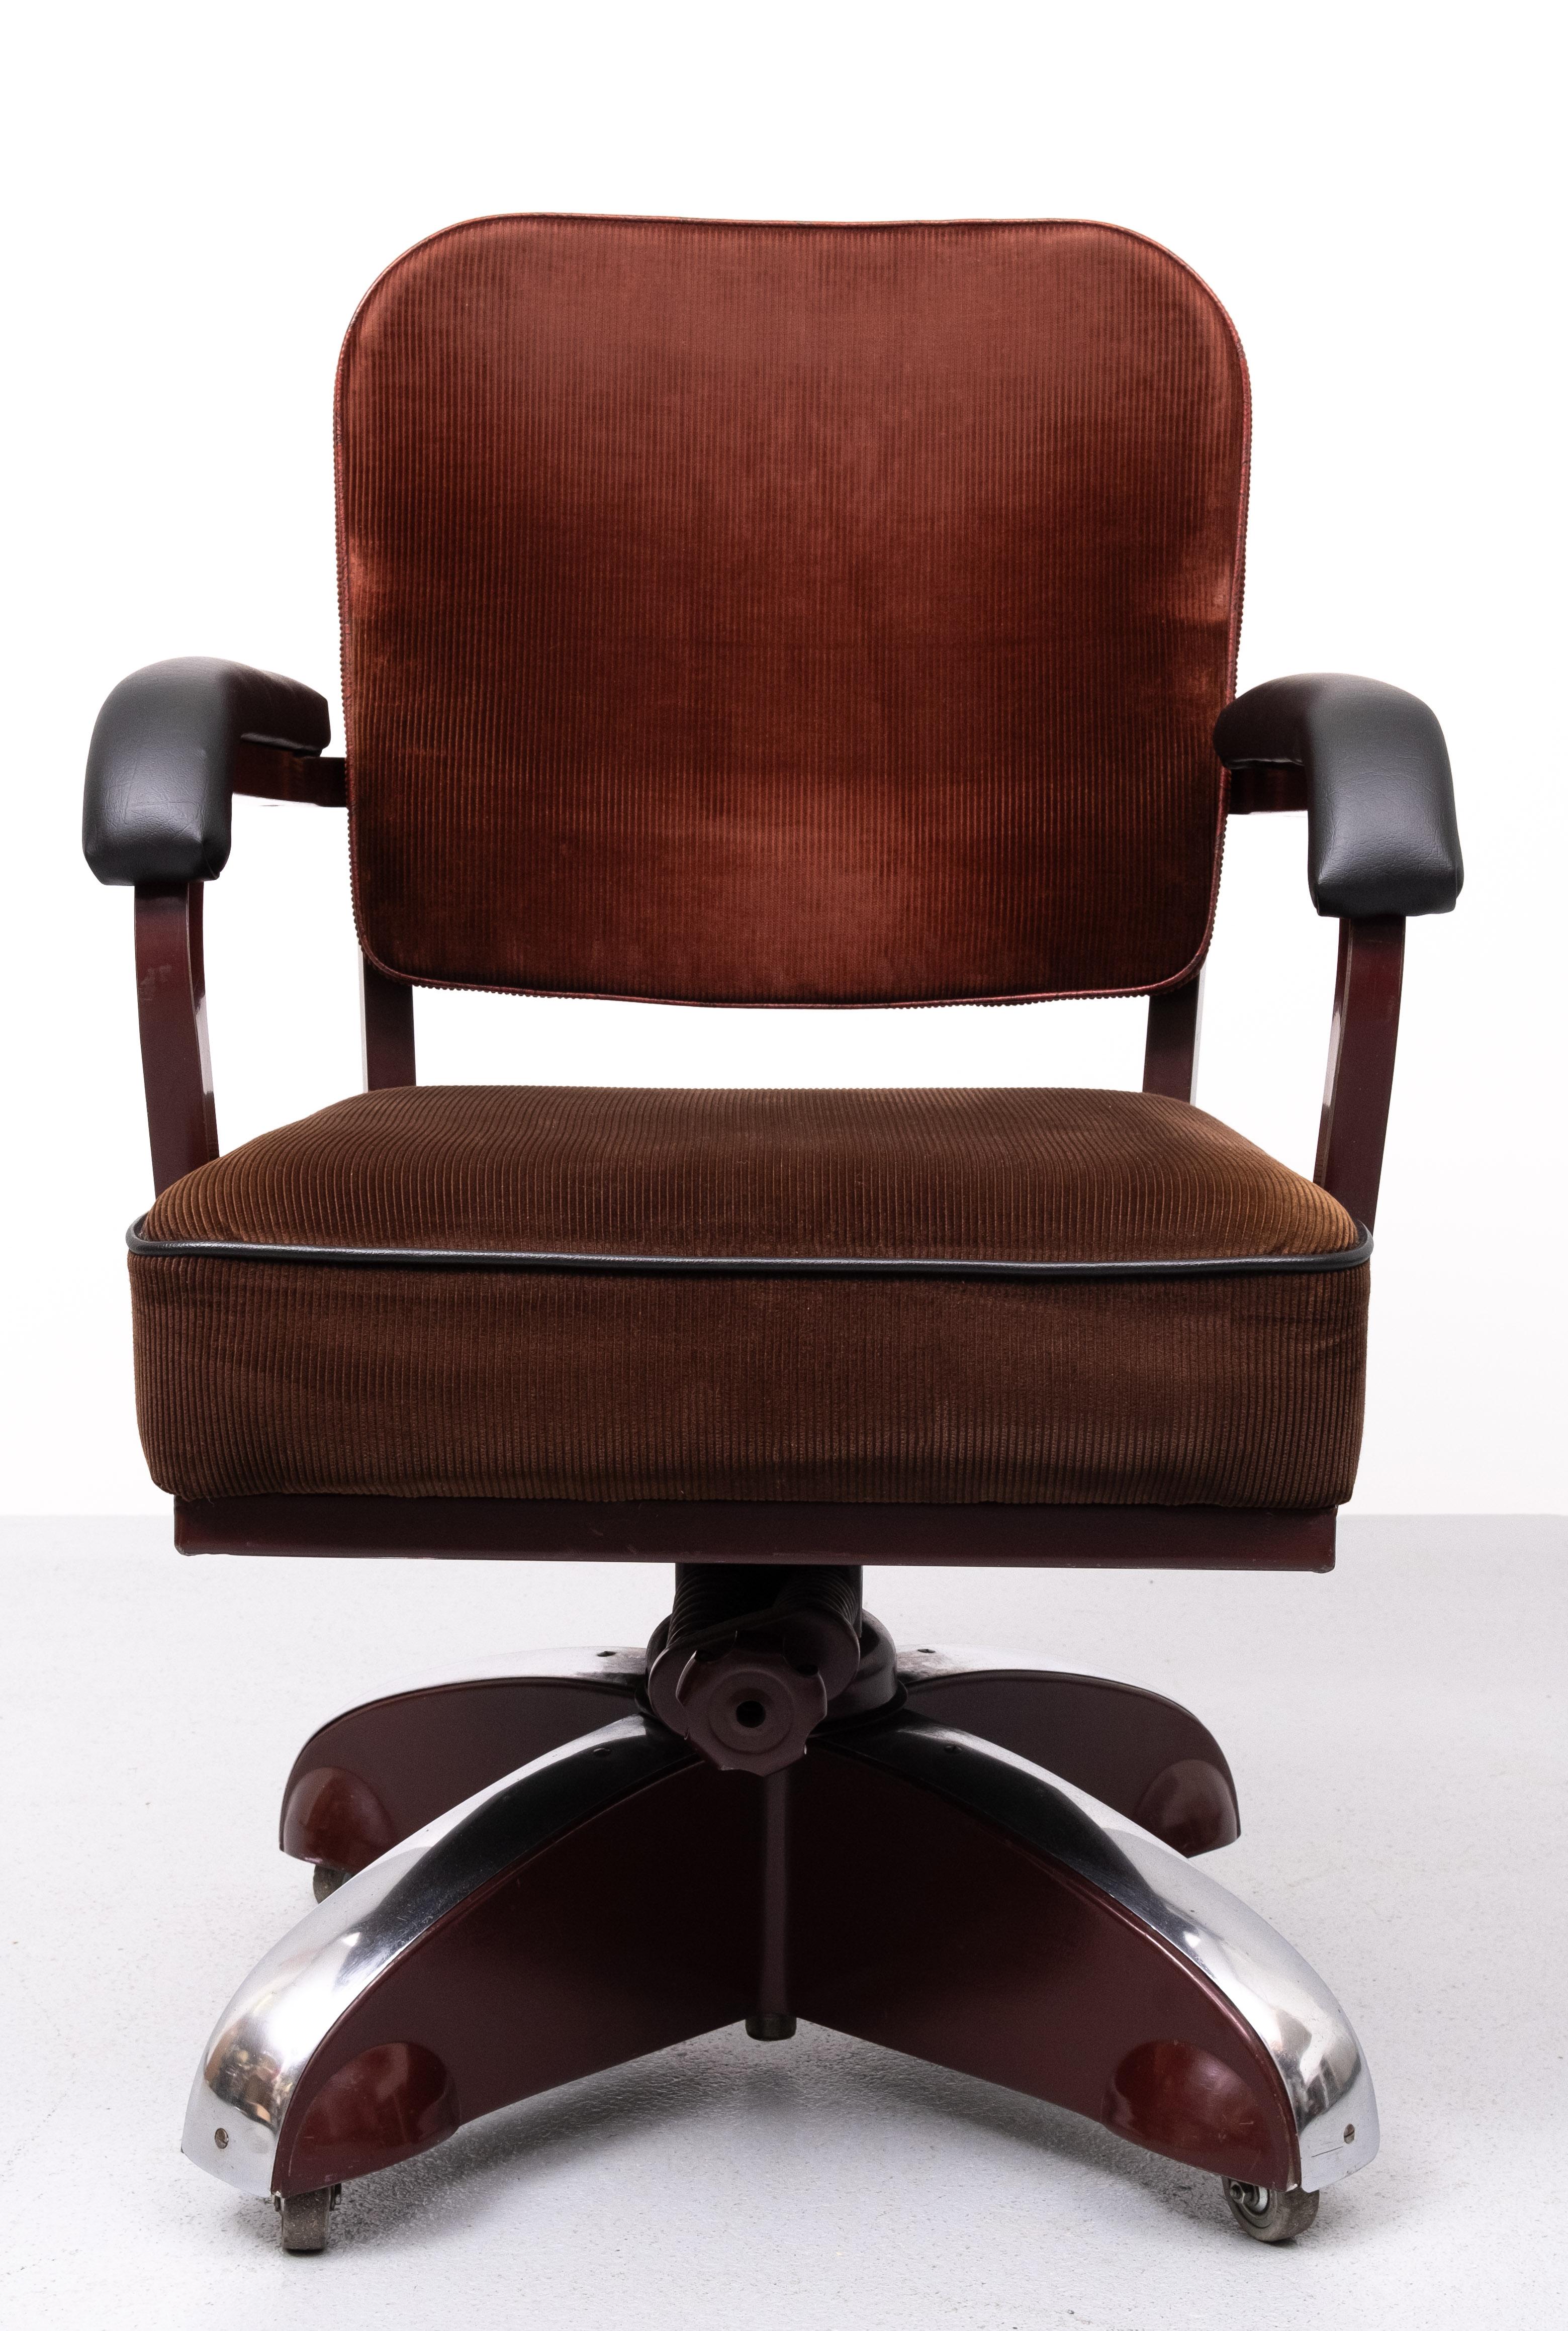 Handsome Ahrend de Cirkel model ''KIngpin'' red corduroy rolling office chair with on burgundy enameled meal frame with black leather arm rests and chrome accents. In original condition with moderate wear consistent with age and use.  Turntable and